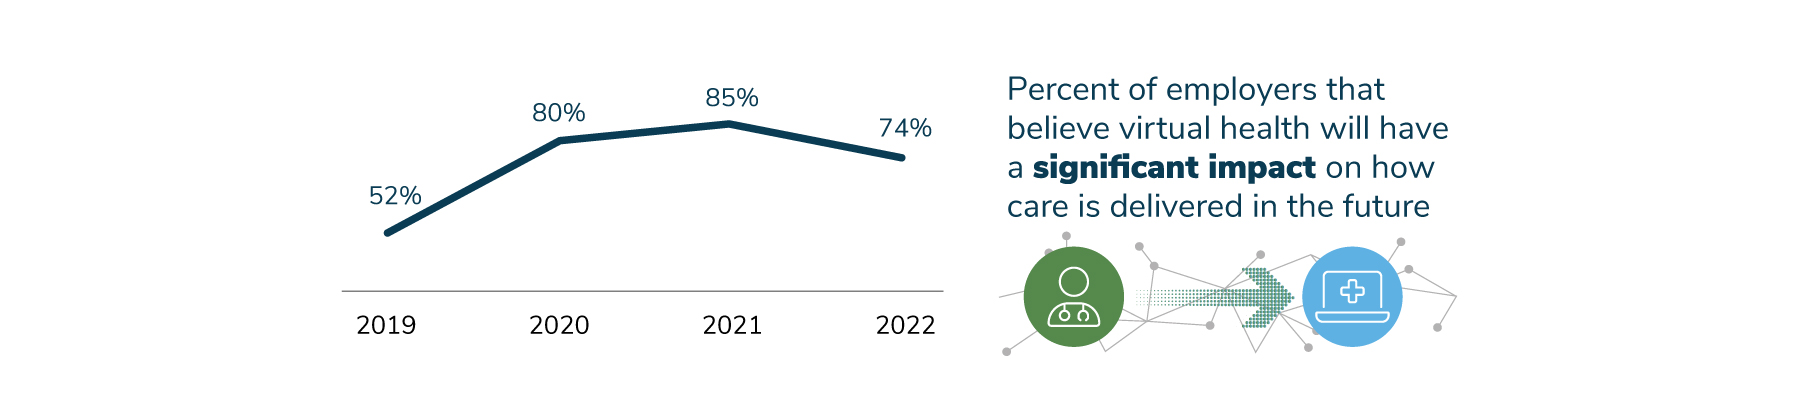 74% of employers believe that virtual health will have a significant impact on care delivery in 2022. Down from 85% last year, but up from 52% in 2019.